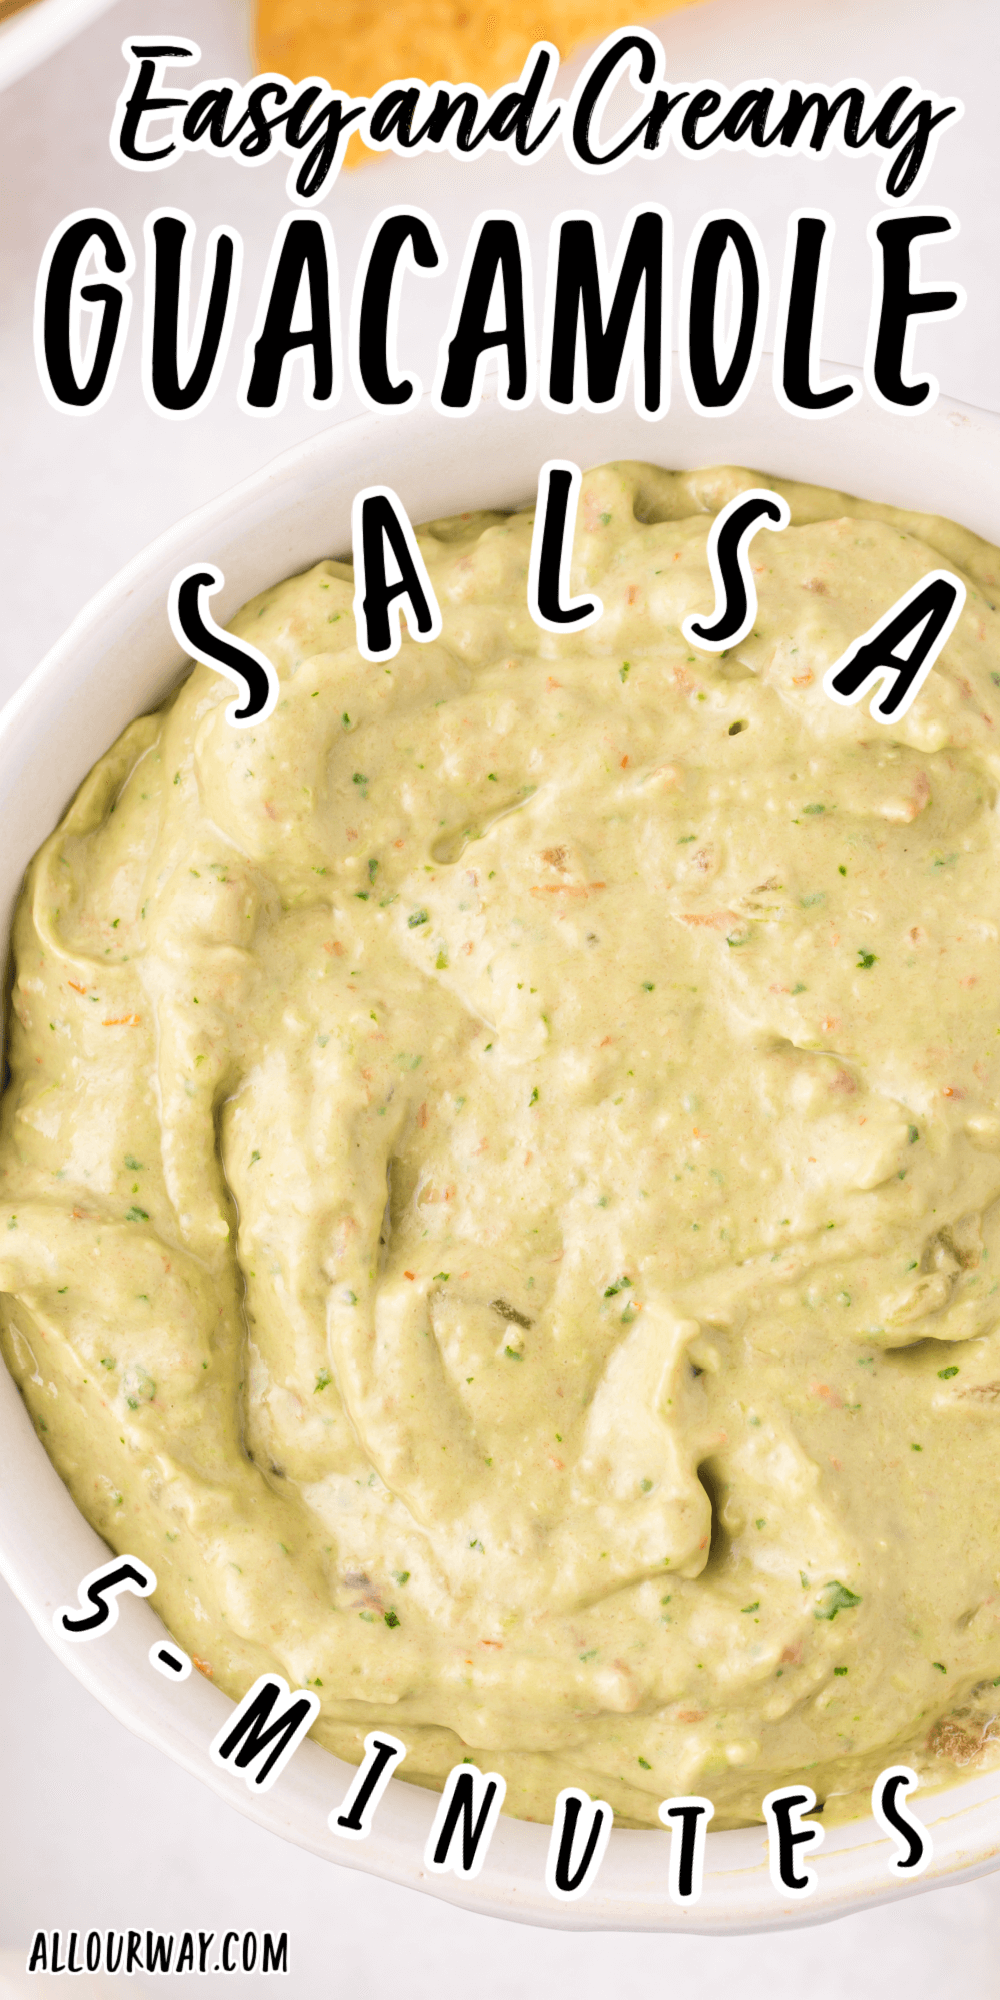 This guacamole salsa is creamy, rich , and takes less than 5 minutes to make. It uses store bought salsa or salsa roja which means little prep with maximum flavor. If you prefer, we include a basic homemade salsa recipe. Serve this salsa for Cinco de Mayo, super bowl parties, barbecues, picnics, and all your favorite gatherings. If you wish you can sub salsa verde for the salsa roja.